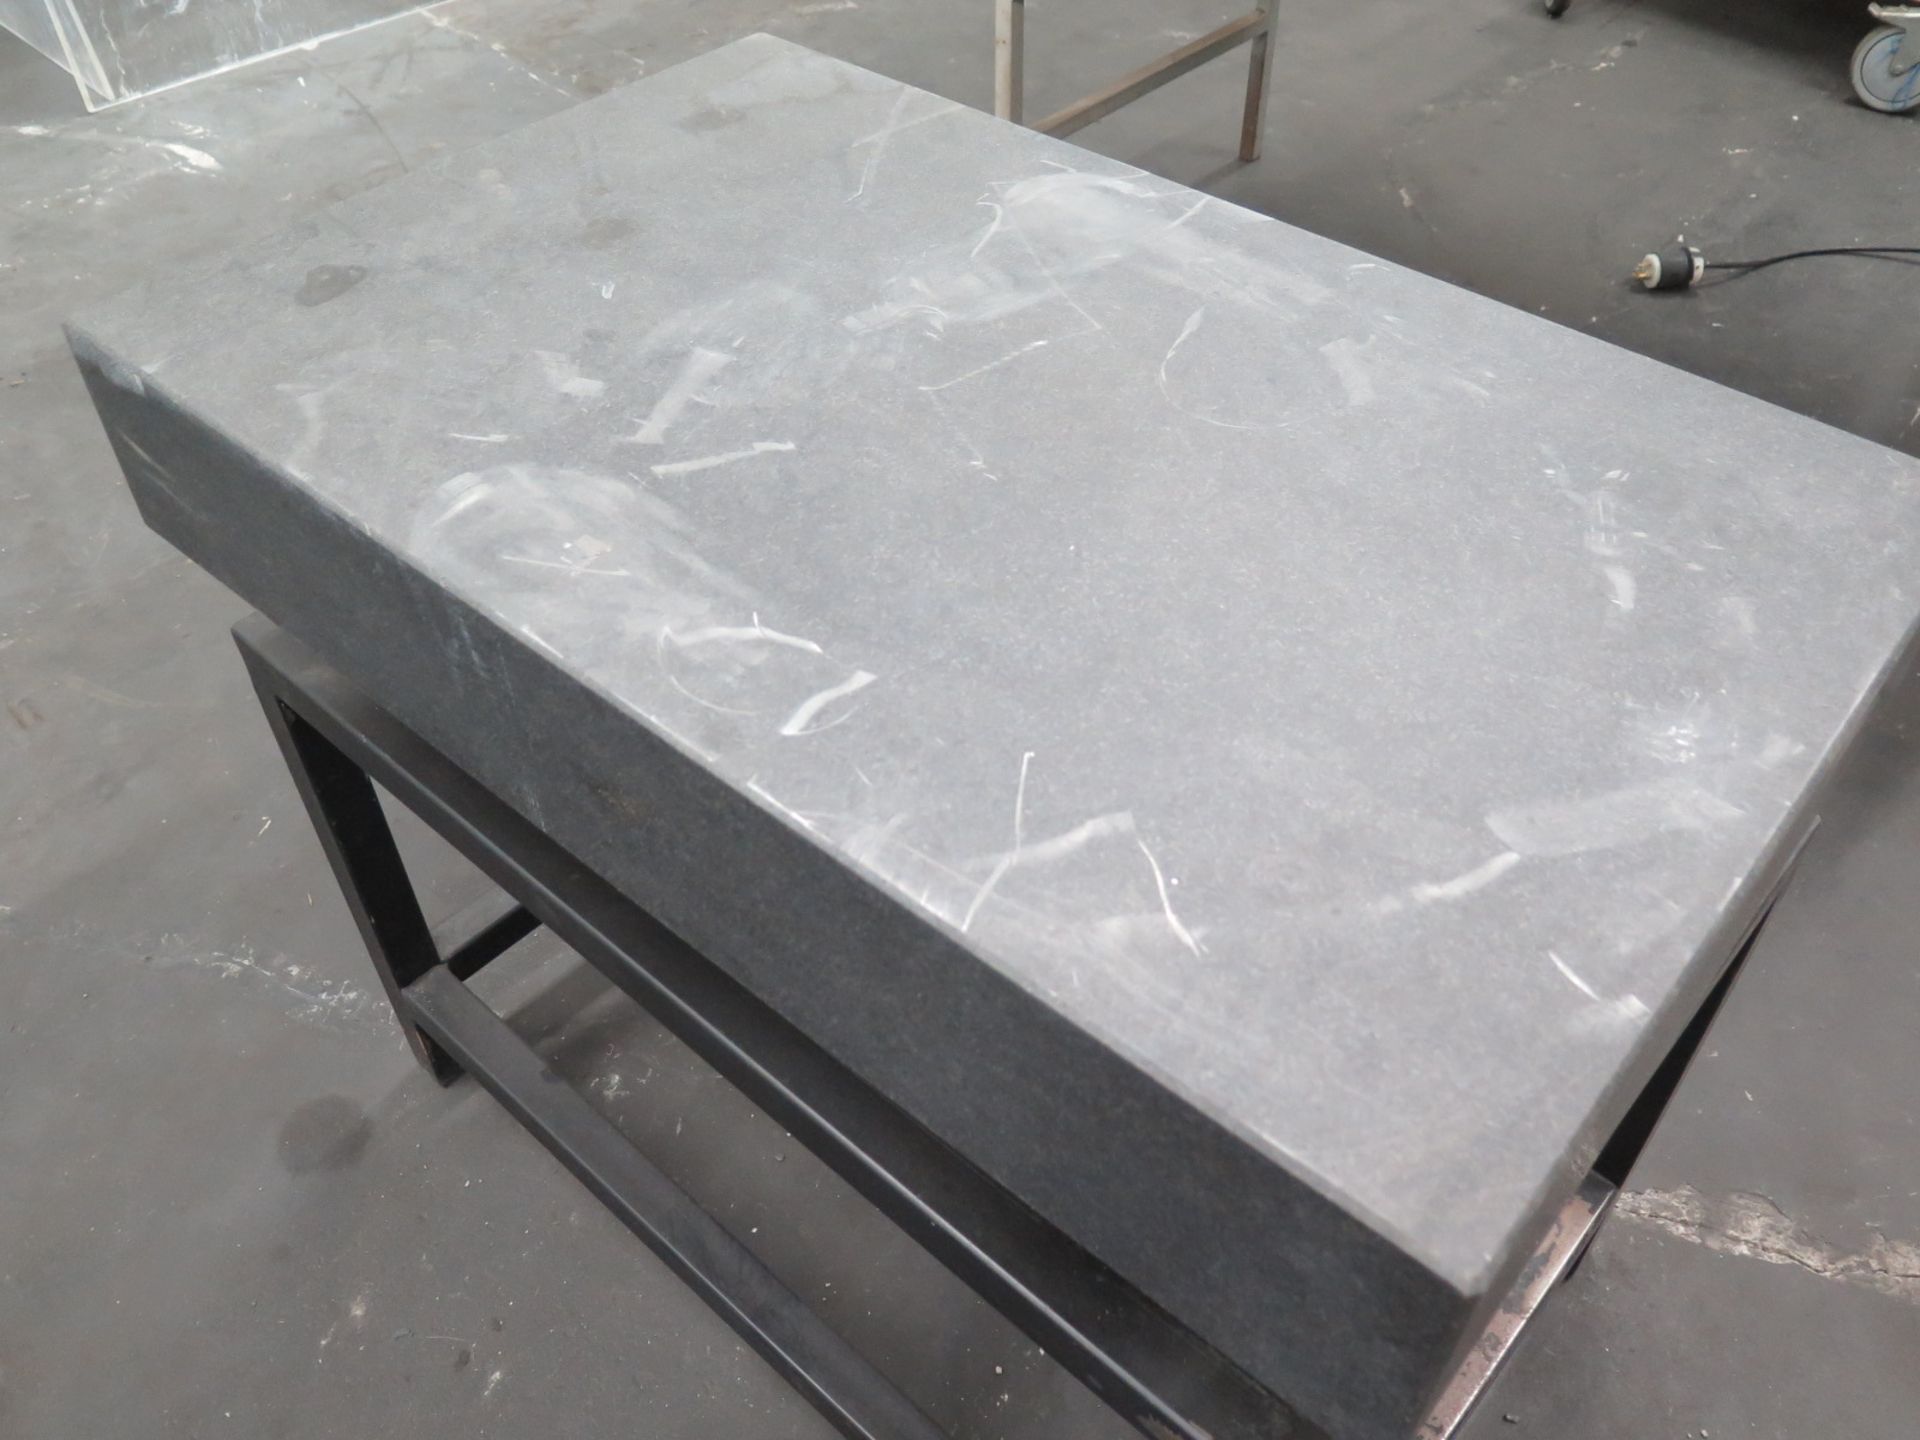 19 ¾” x 31 ¾” x 5 ¼” Granite Surface Plate w/ Stand - Image 2 of 2